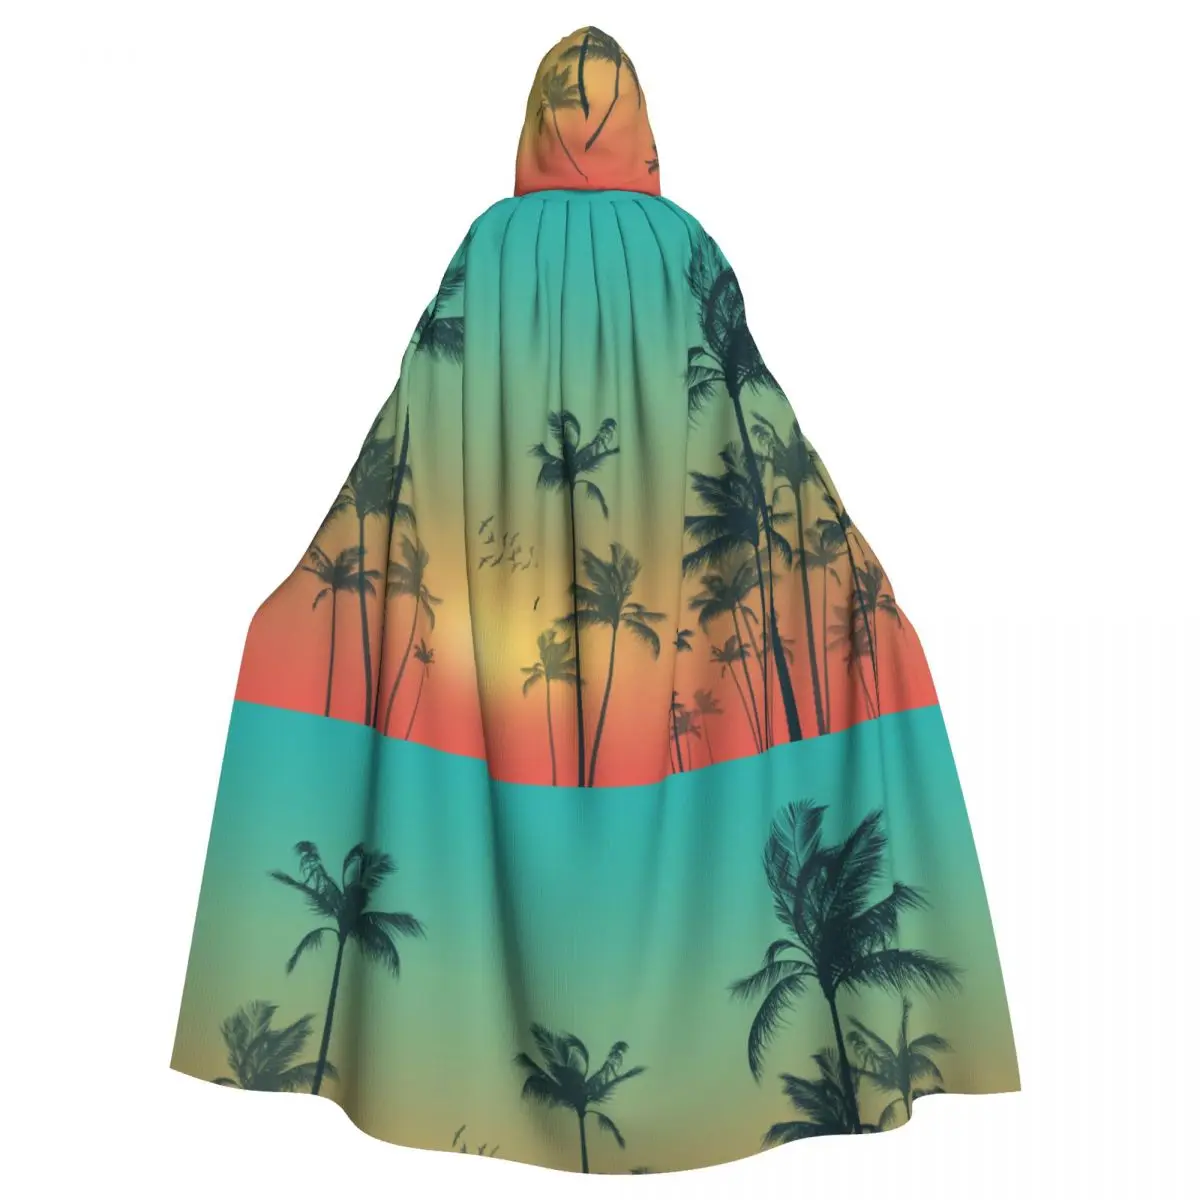 

Hooded Cloak Unisex Cloak with Hood Summer Tropical Palm Trees Cloak Vampire Witch Cape Cosplay Costume